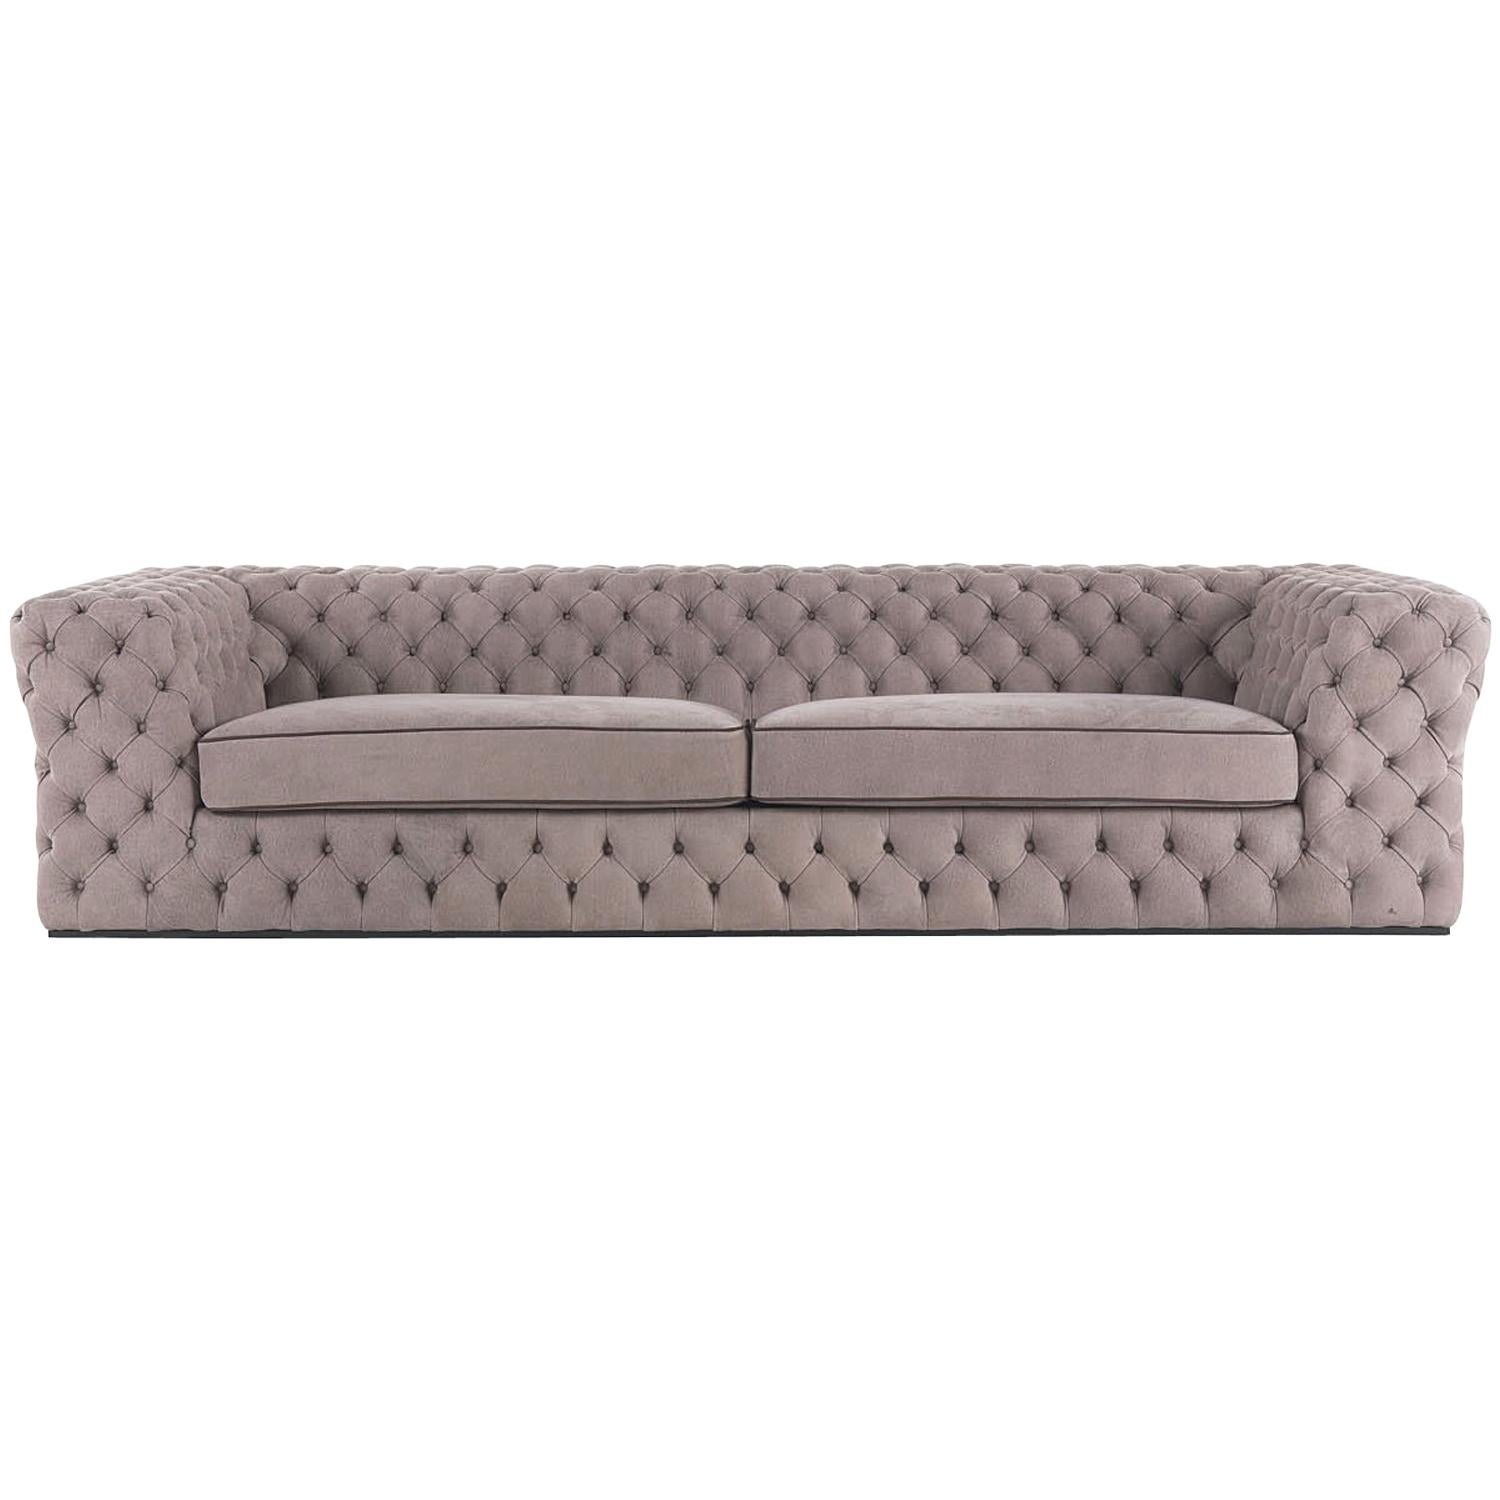 Gianfranco Ferre King's Cross Three-Seat Sofa in Taupe Leather For Sale